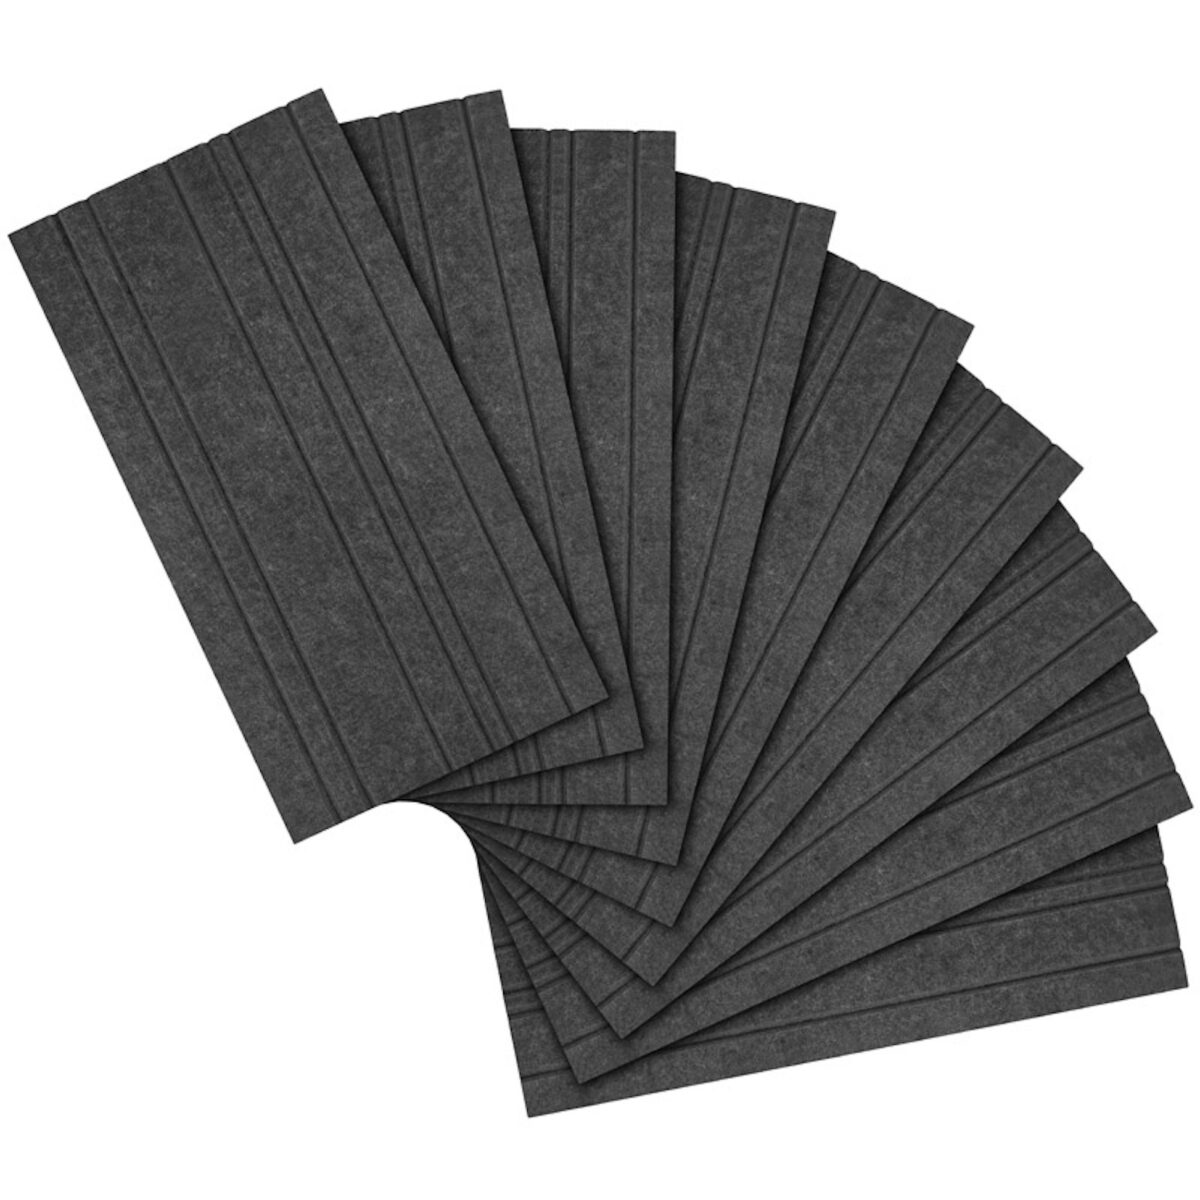 Streamplify ACOUSTIC PANEL - 9 Pack, grey 60x30cm, 12mm -20db noise reduction - Pro GamersWare 2.35.63.03.008